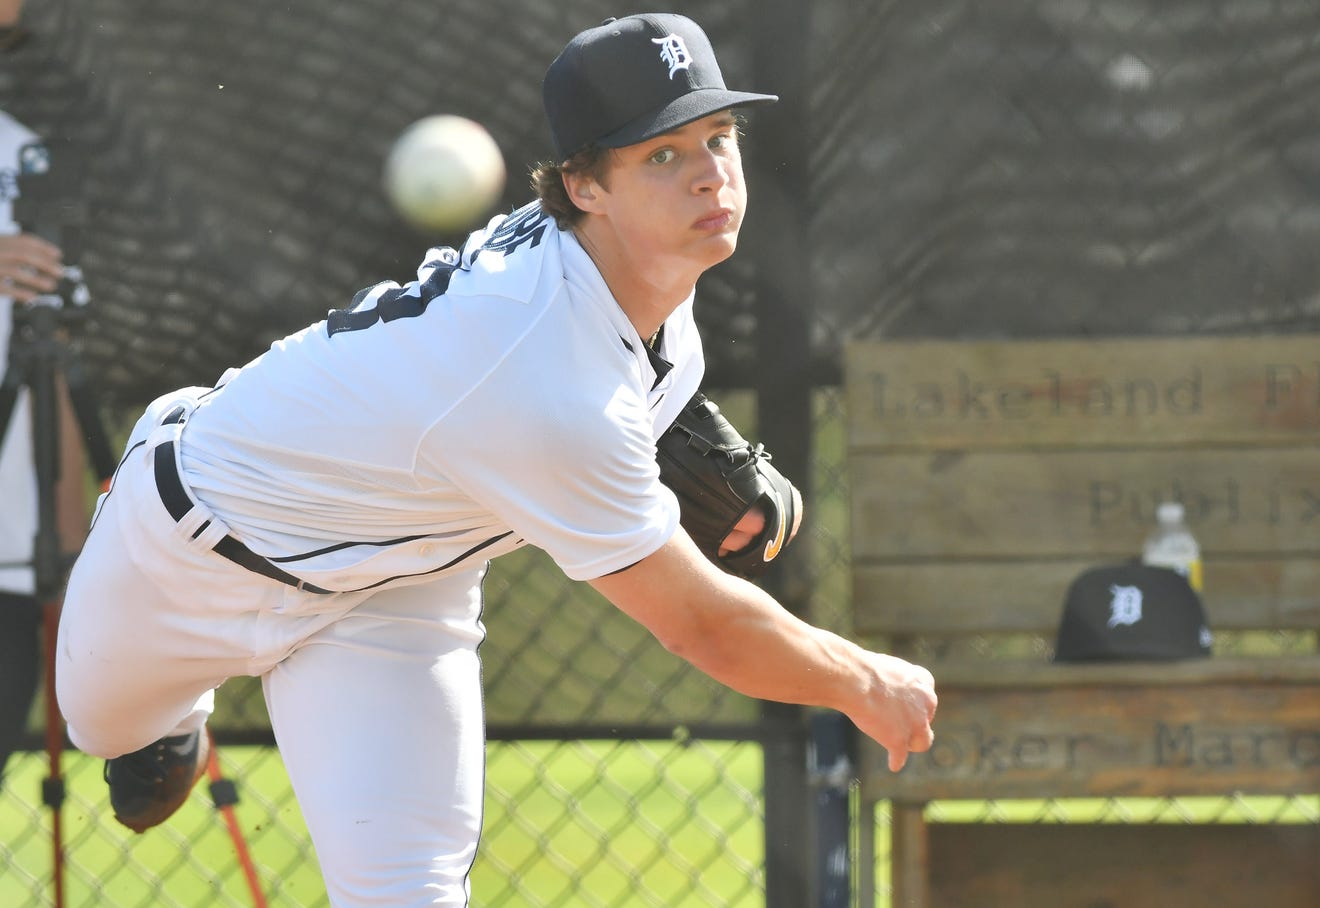 Right-hander Jackson Jobe is the Tigers' top-ranked prospect, according to Baseball America.